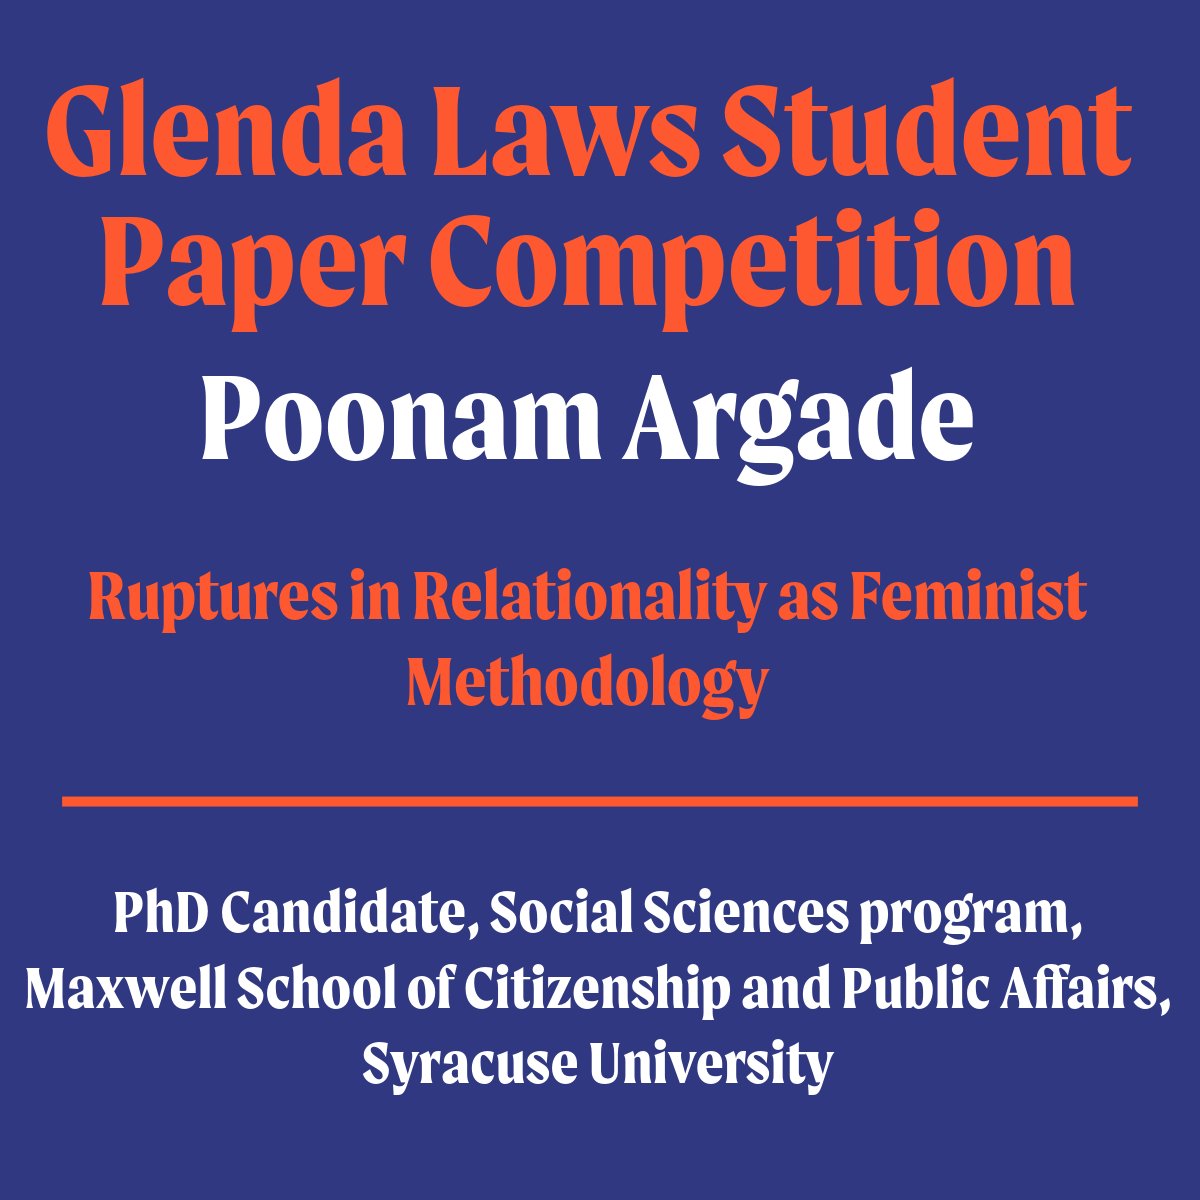 Join us in congratulating Poonam Argade, recipient of the 2024 Glenda Laws Student Paper Competition, for the paper 'Ruptures in relationality as feminist method.'